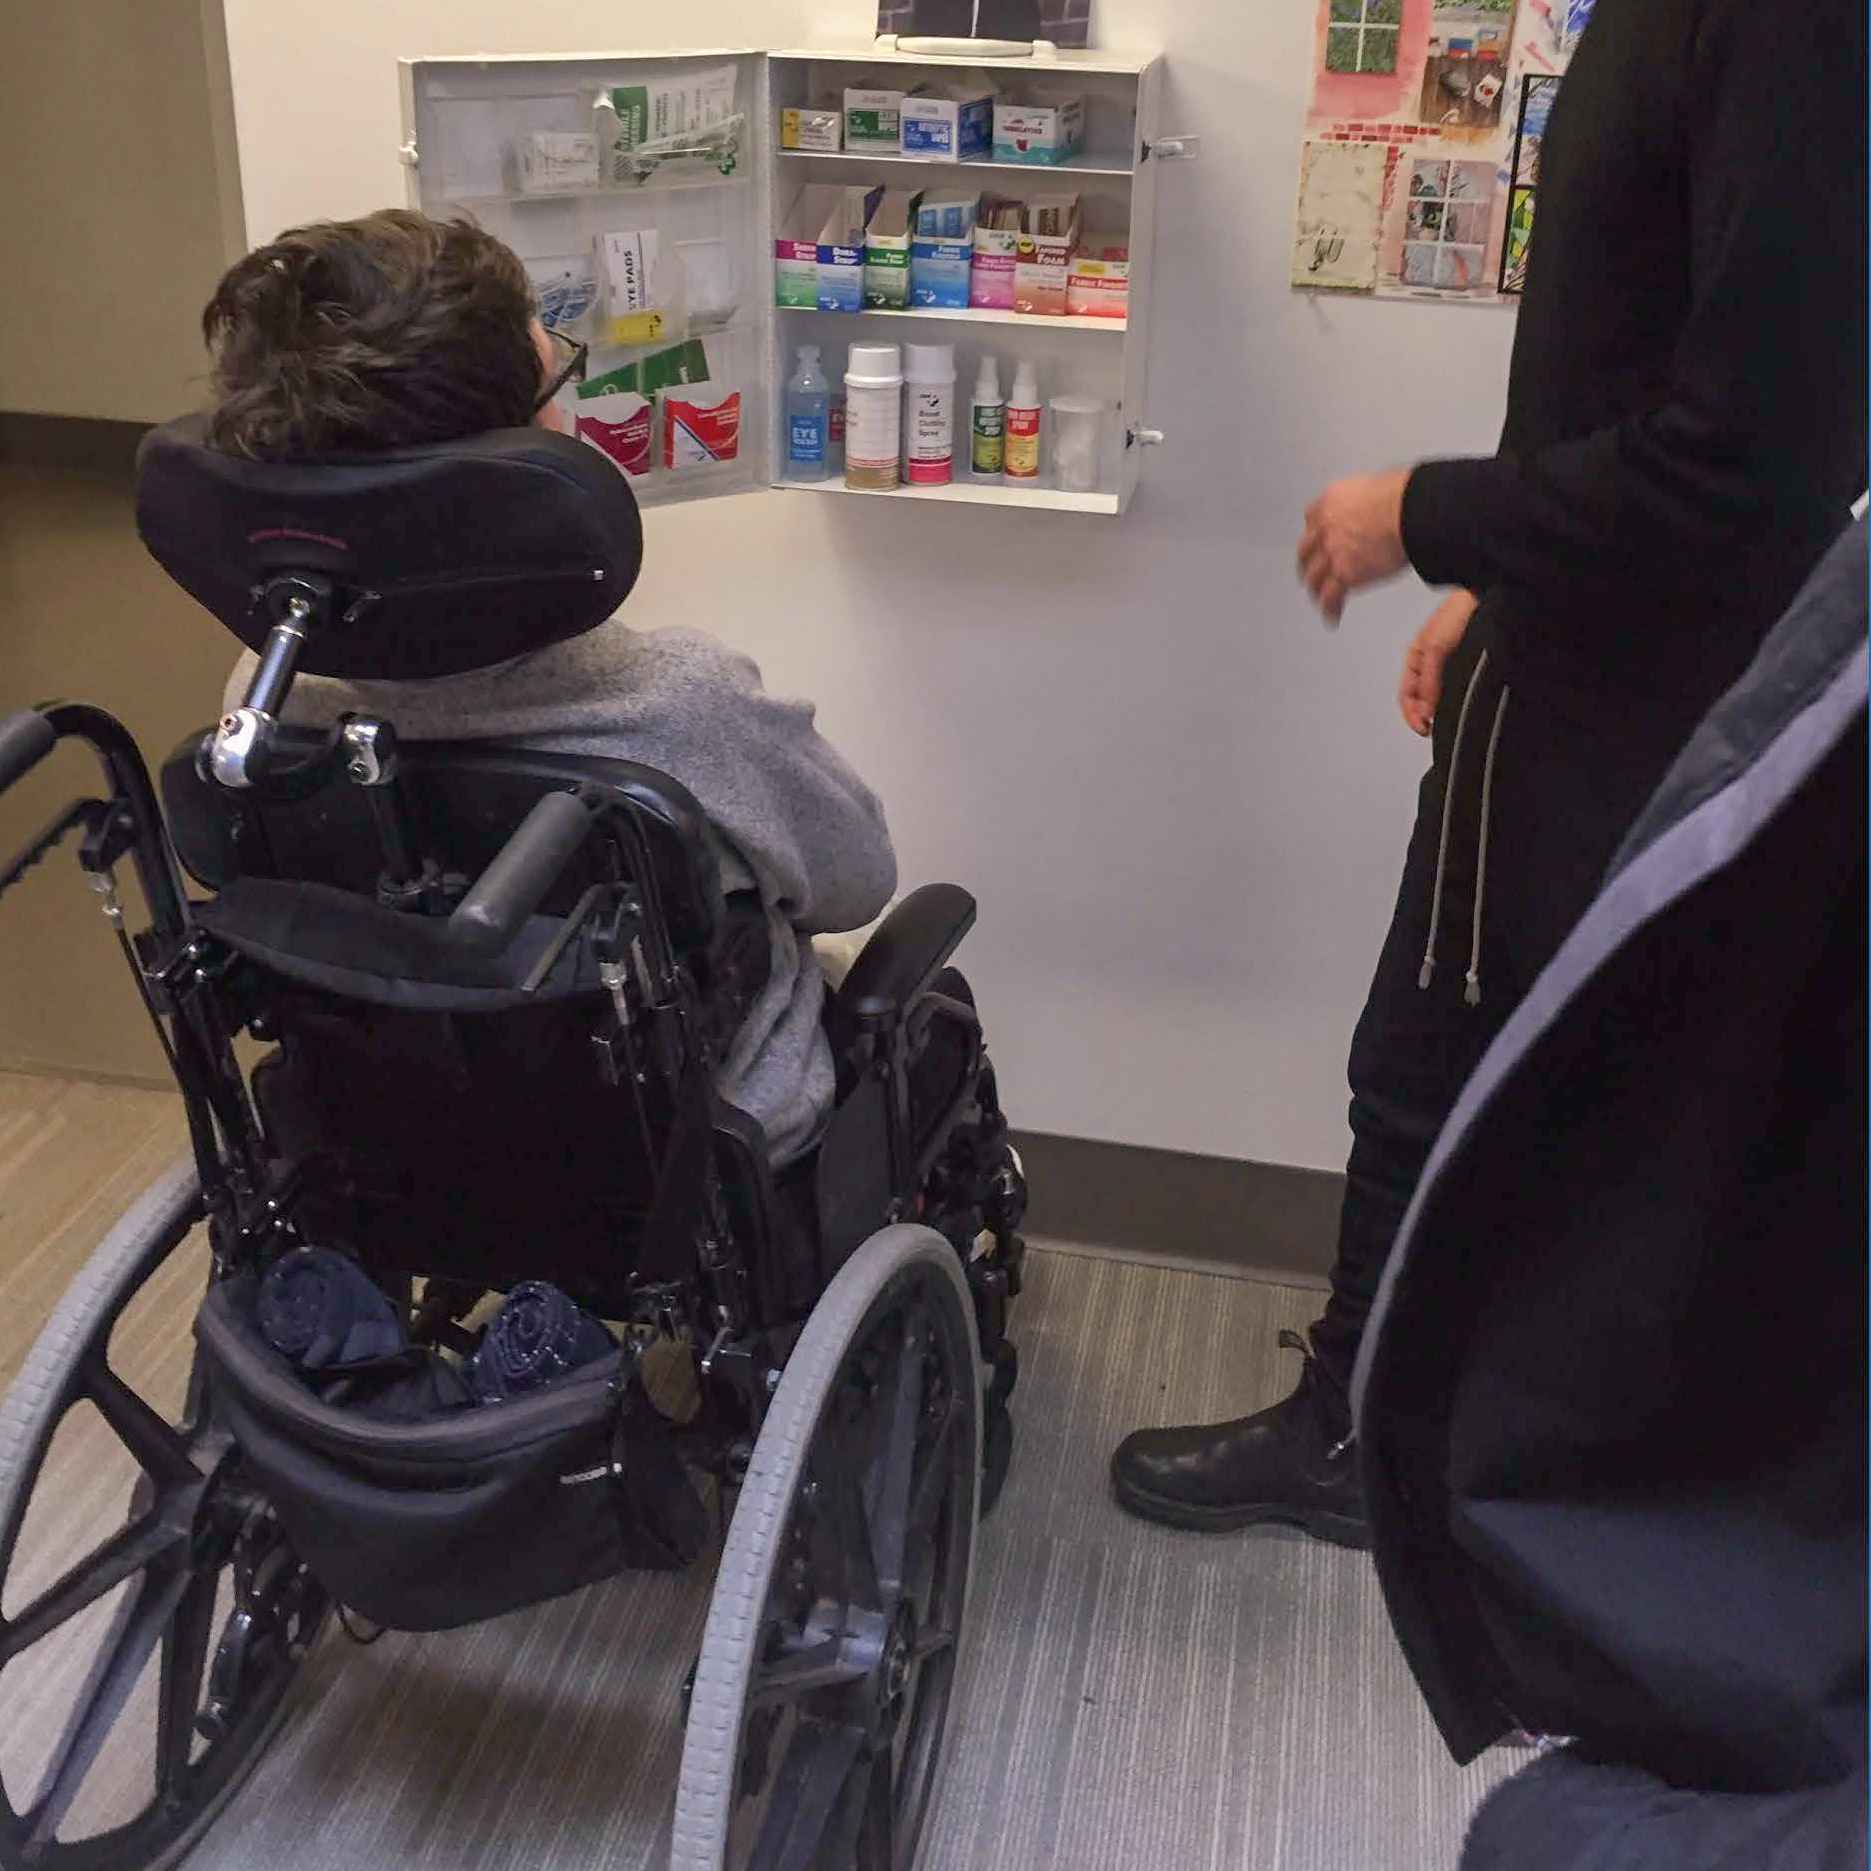 student in wheelchair accessing first-aid kit on wall